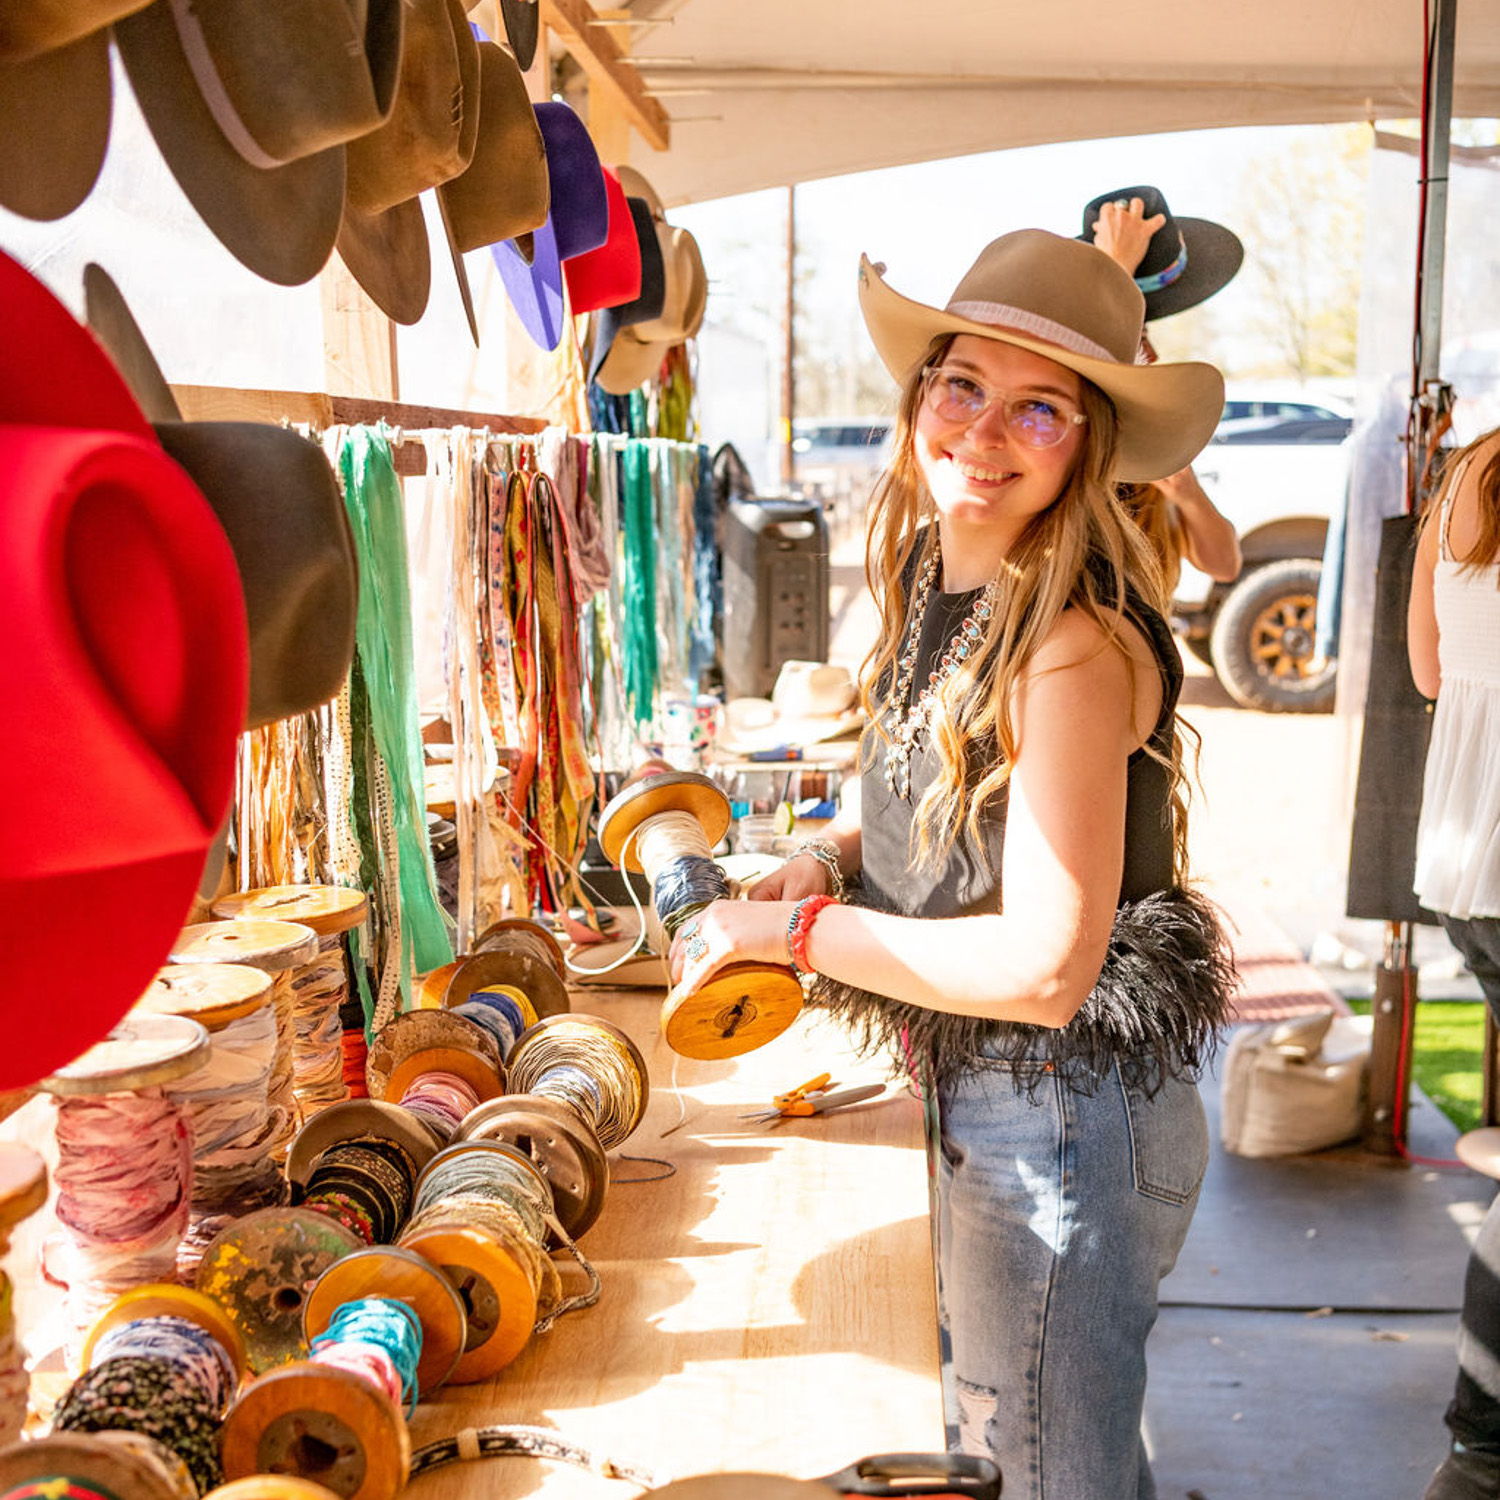 Kemo Sabe: High-End Western Wear, Hats, Boots